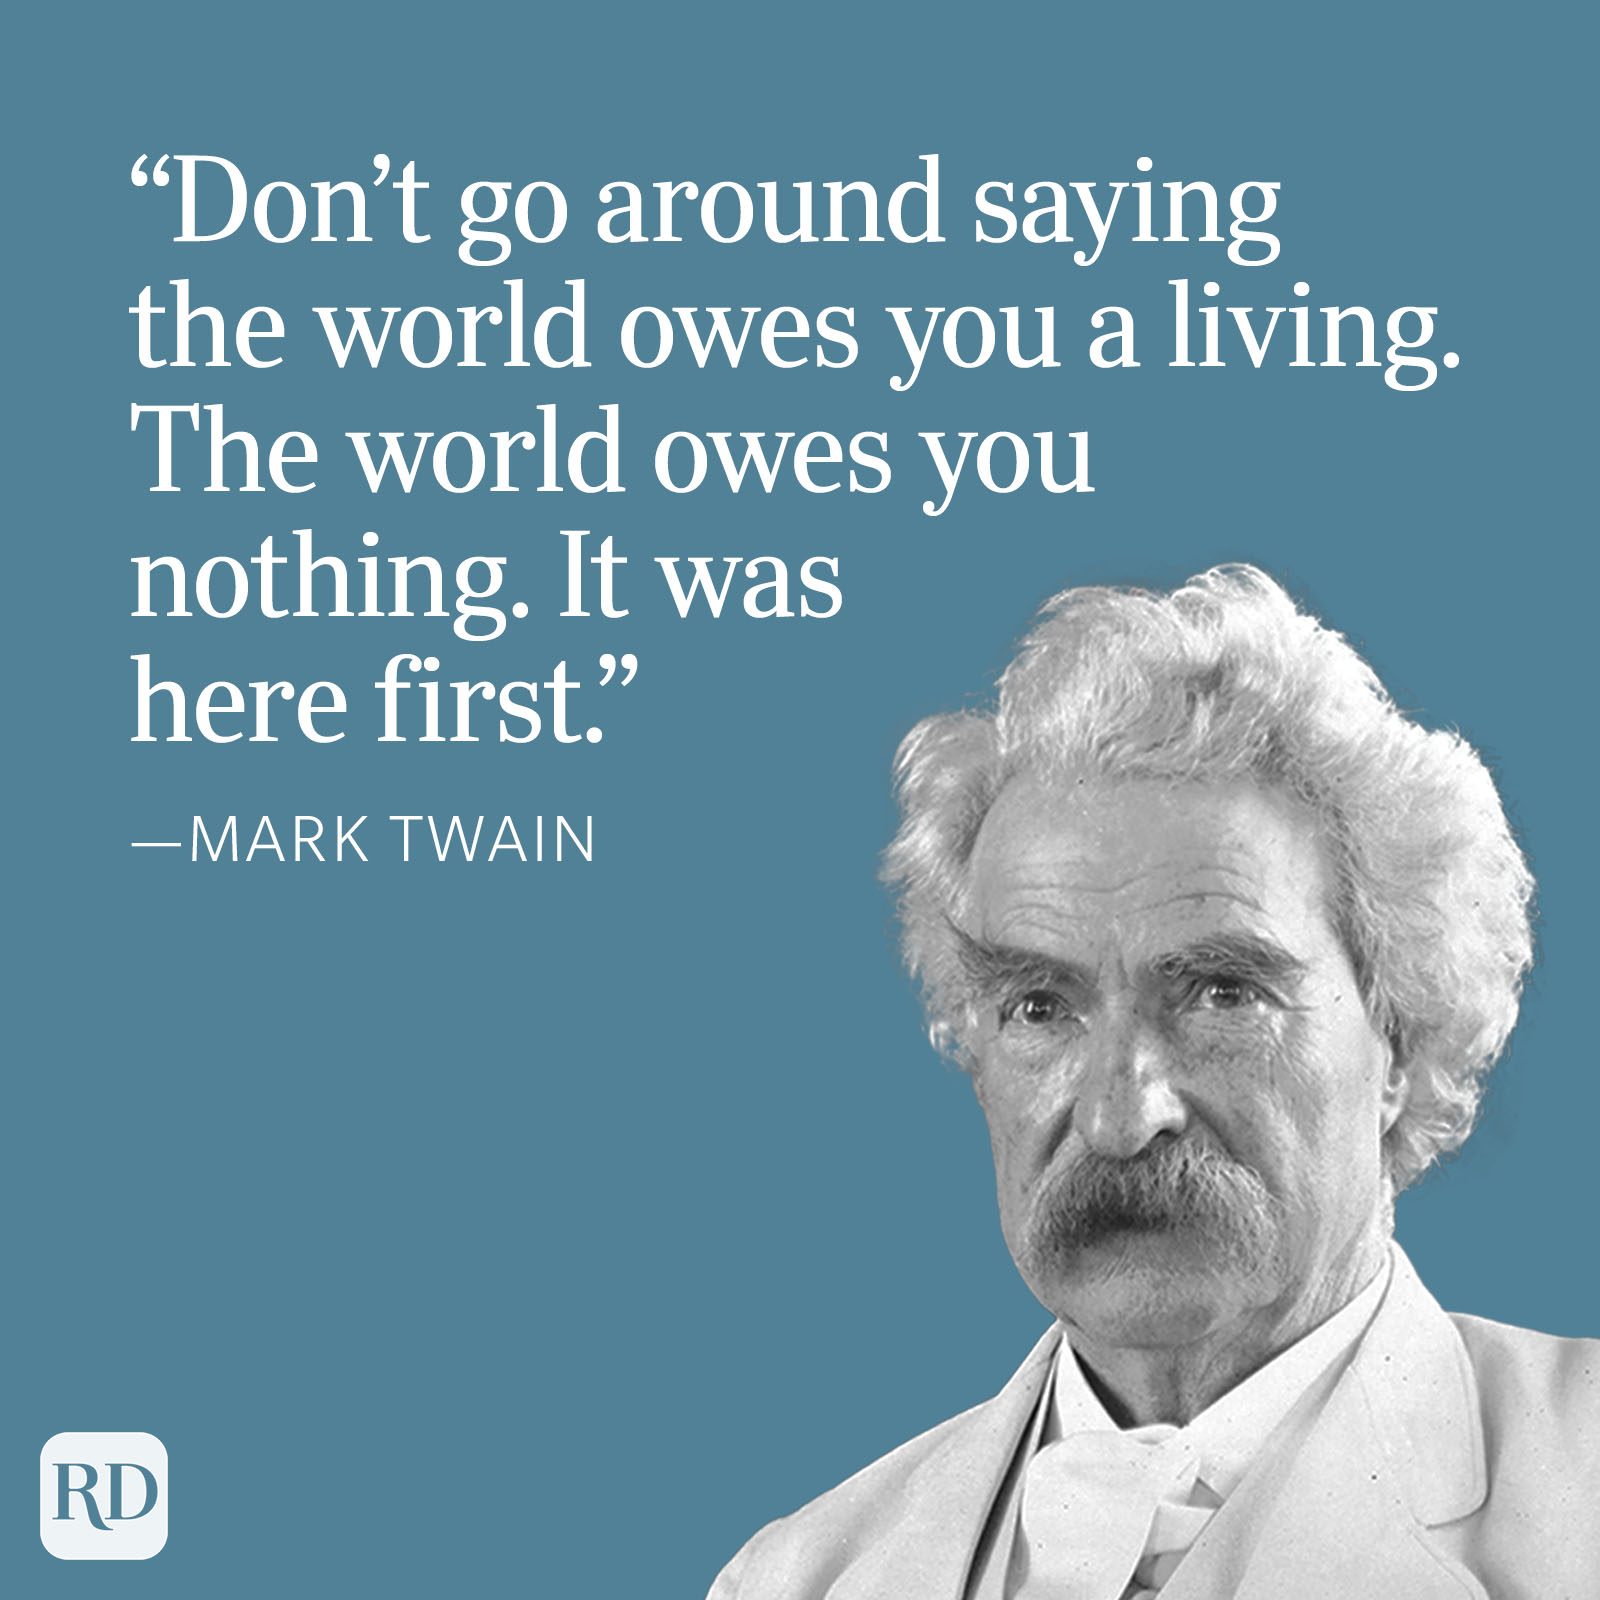 100 Best Quotes from Famous People | Reader's Digest